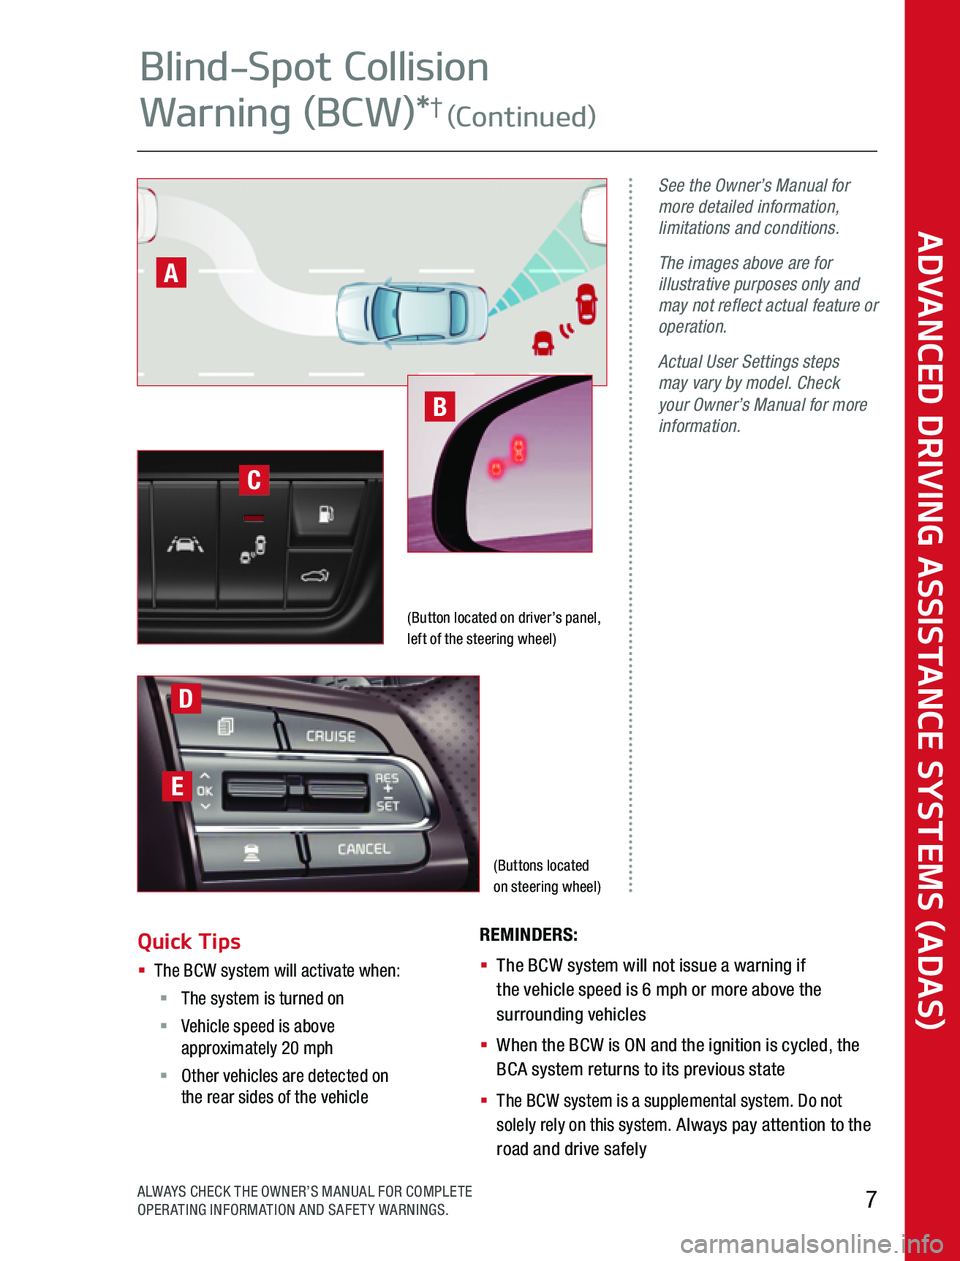 KIA SEDONA 2020  Advanced Driving Assistance System (Buttons located  on steering wheel)
See the Owner’s Manual for more detailed information, limitations and conditions.
The images above are for illustrative purposes only and may not reflect actual 